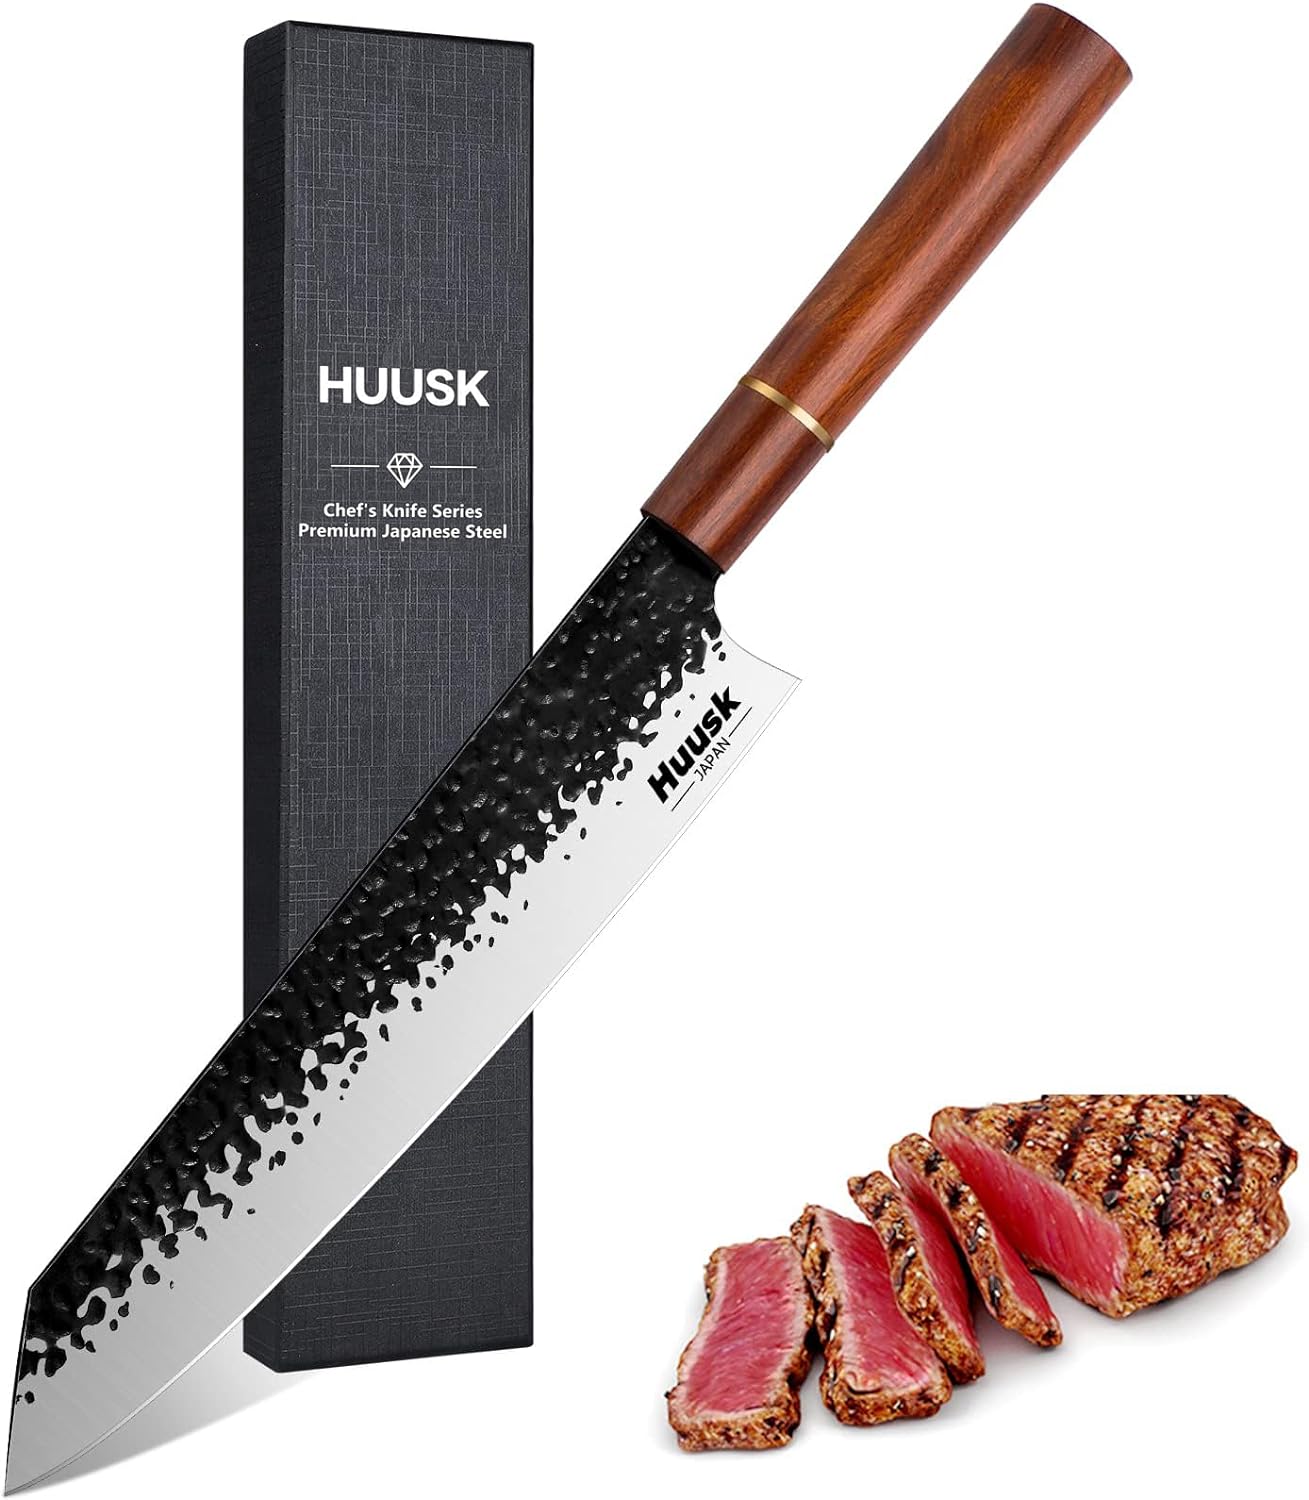 Kiritsuke Chef Knife - 9 Inch Japanese Kitchen Knife, Professional High Carbon Steel Sharp Sushi knife with Ergonomic Rosewood Handle for Meat, Fish, Vegetables